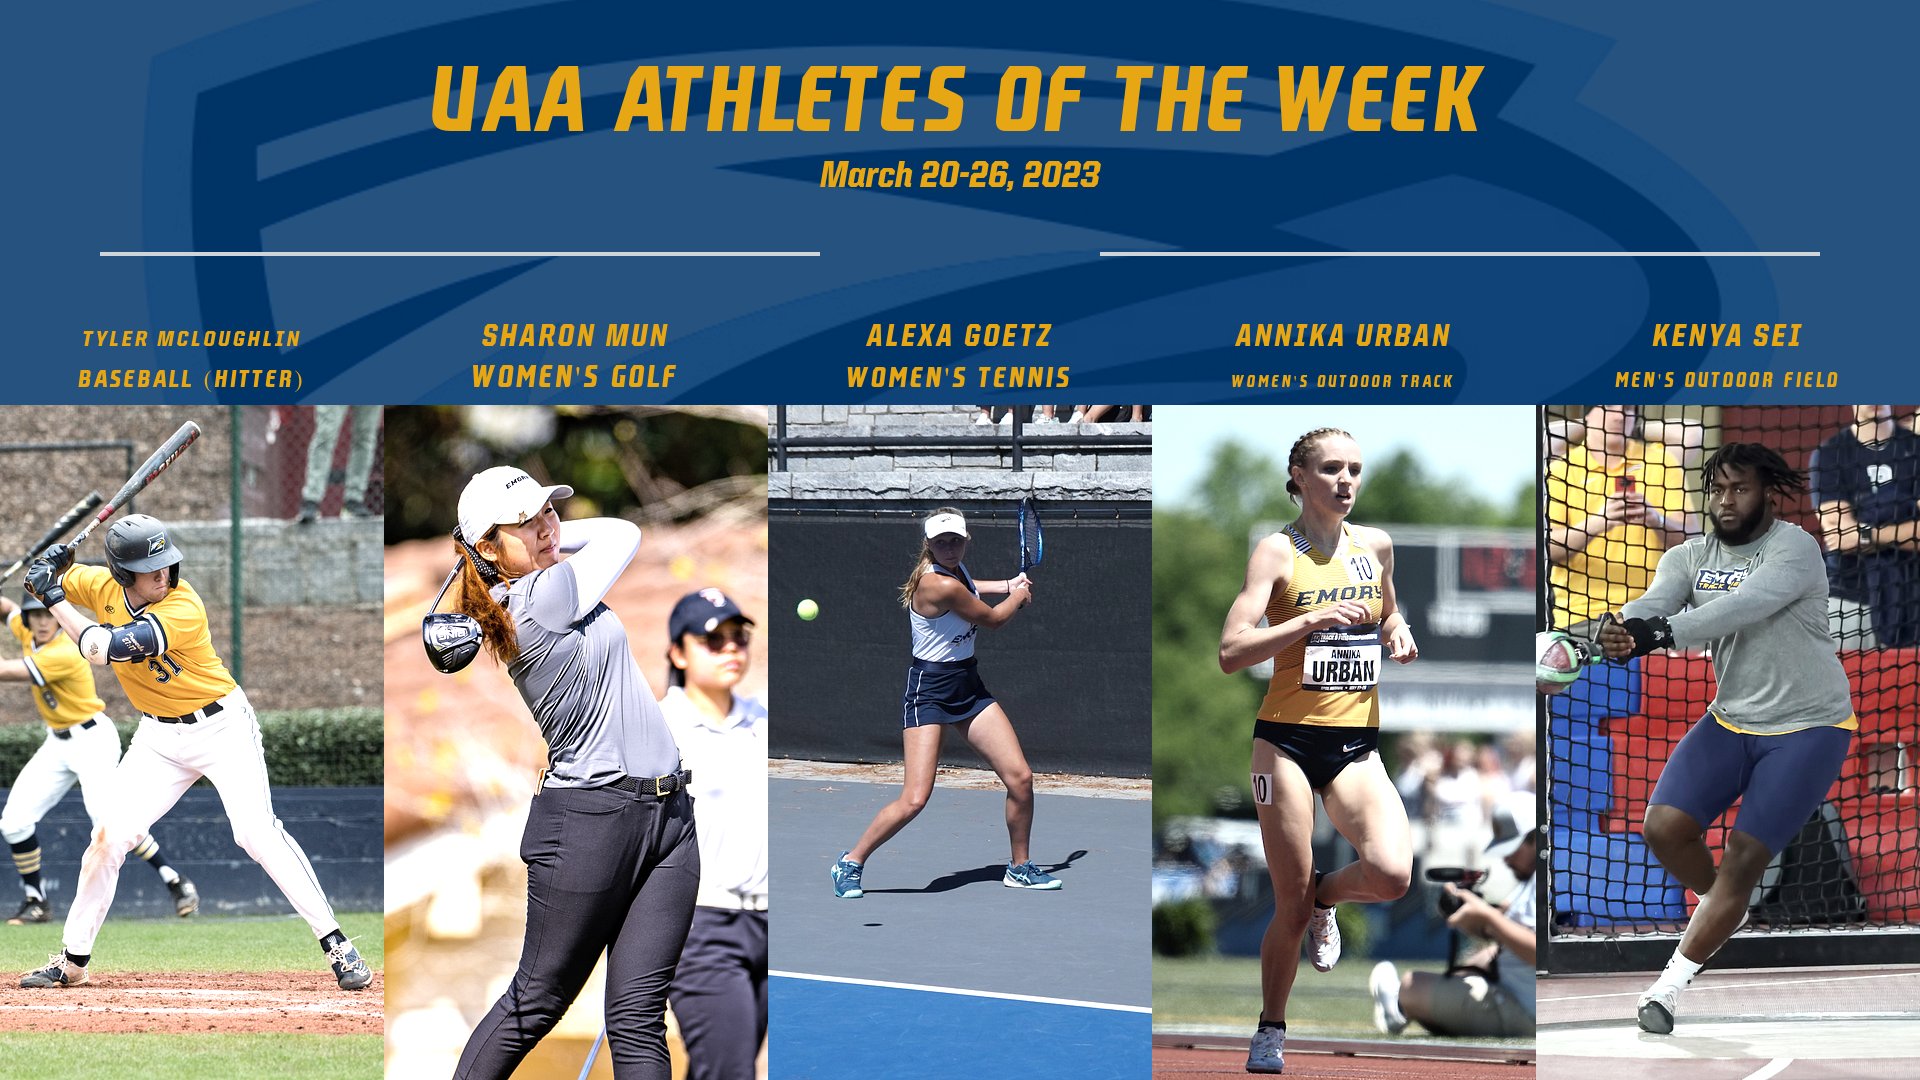 Five Eagles Named UAA Athletes of the Week